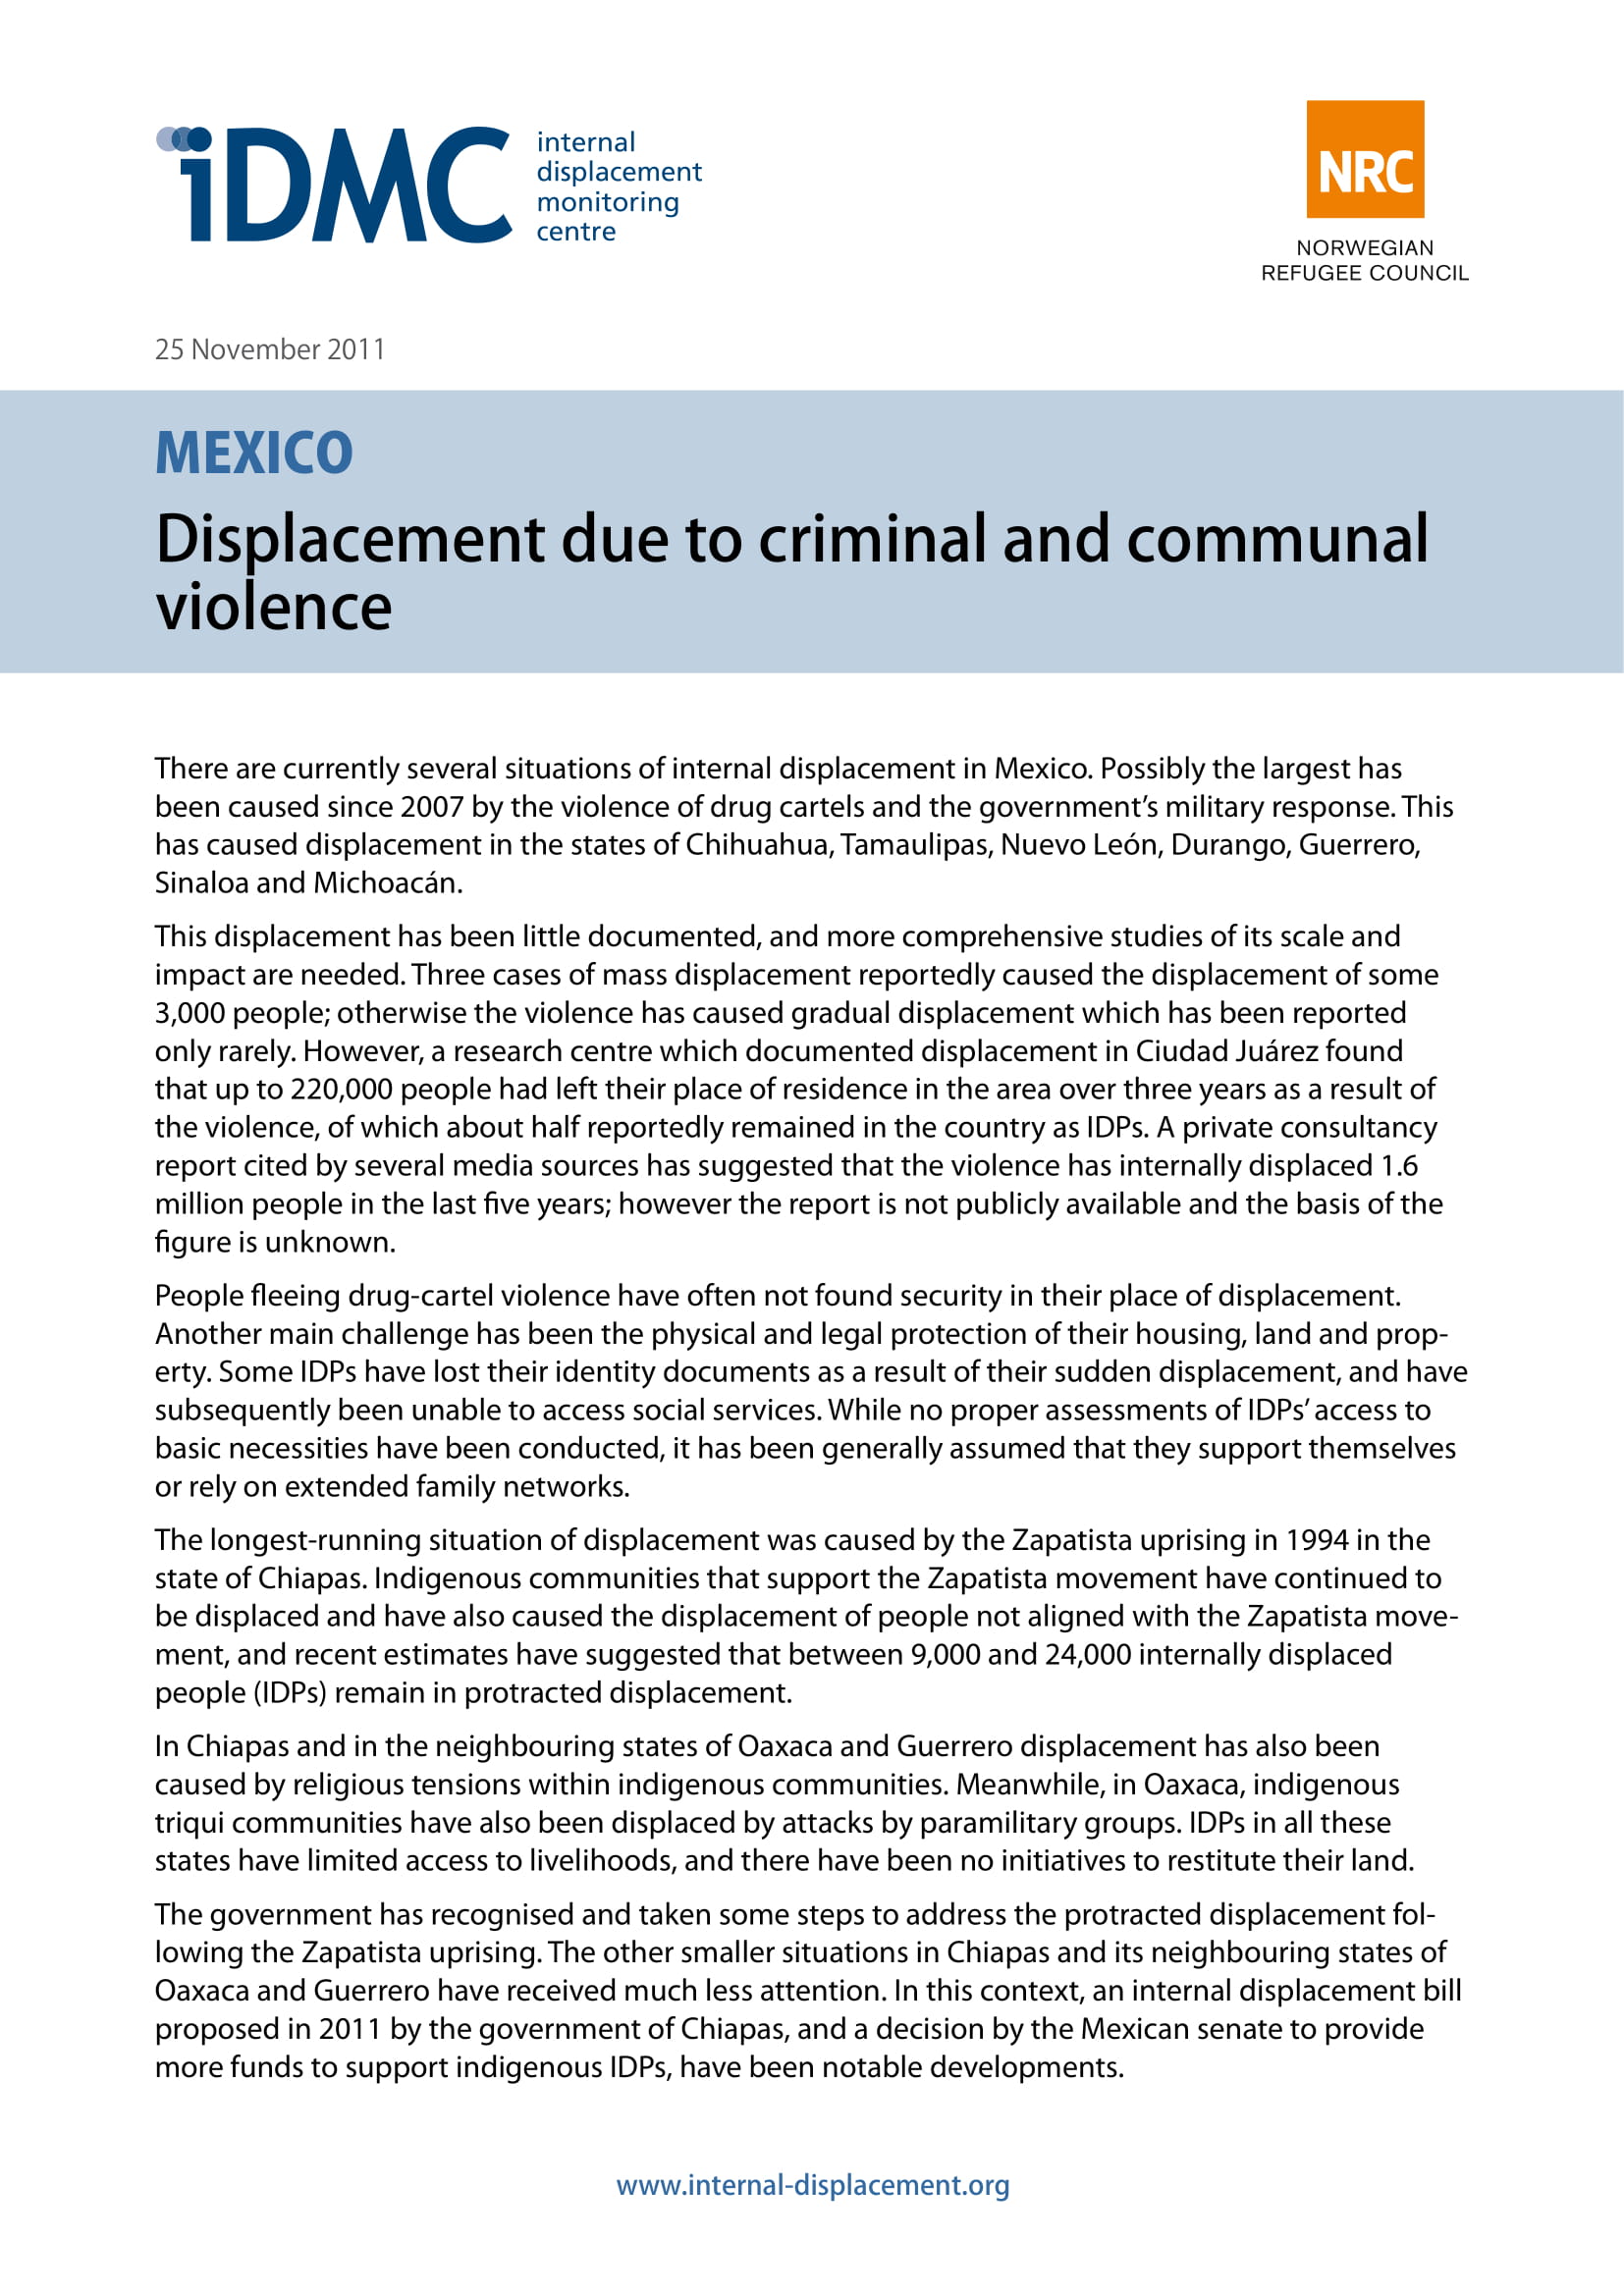 Mexico: Displacement due to criminal and communal violence